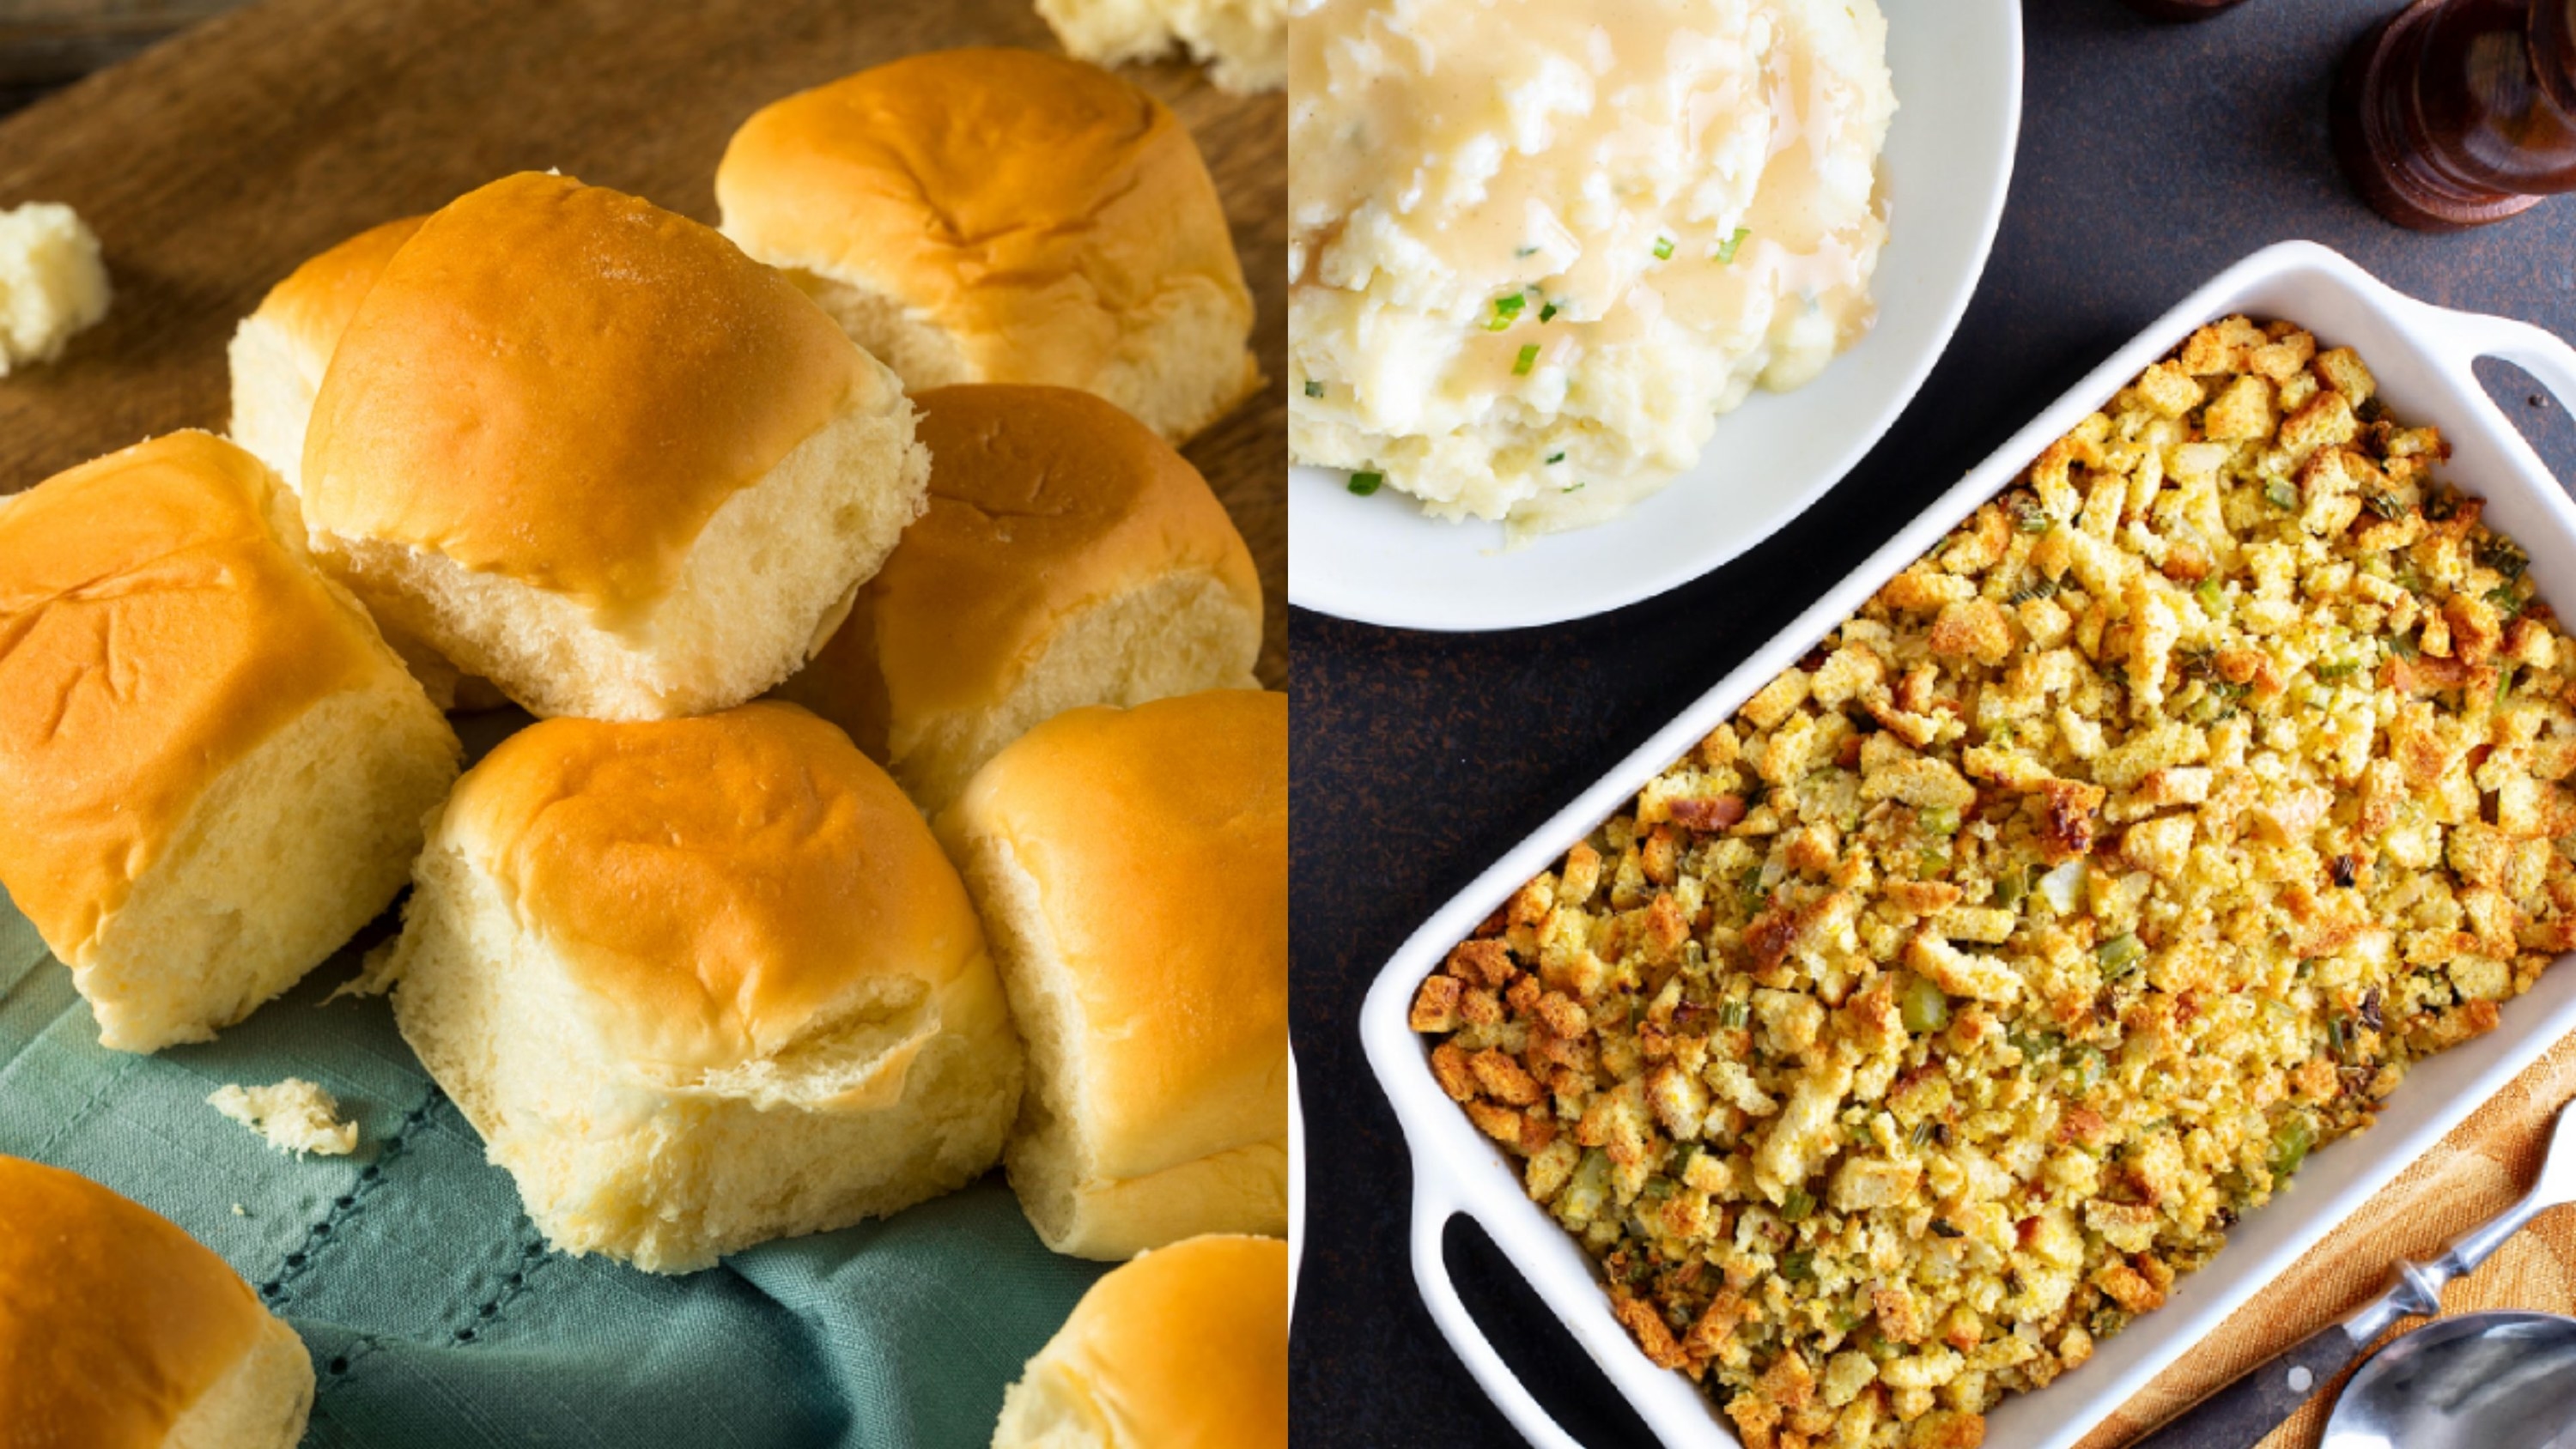 Variety of Thanksgiving sides on the dinner table, mashed potatoes, green beans and stuffing / Homemade Baked Sweet Hawaiian Buns